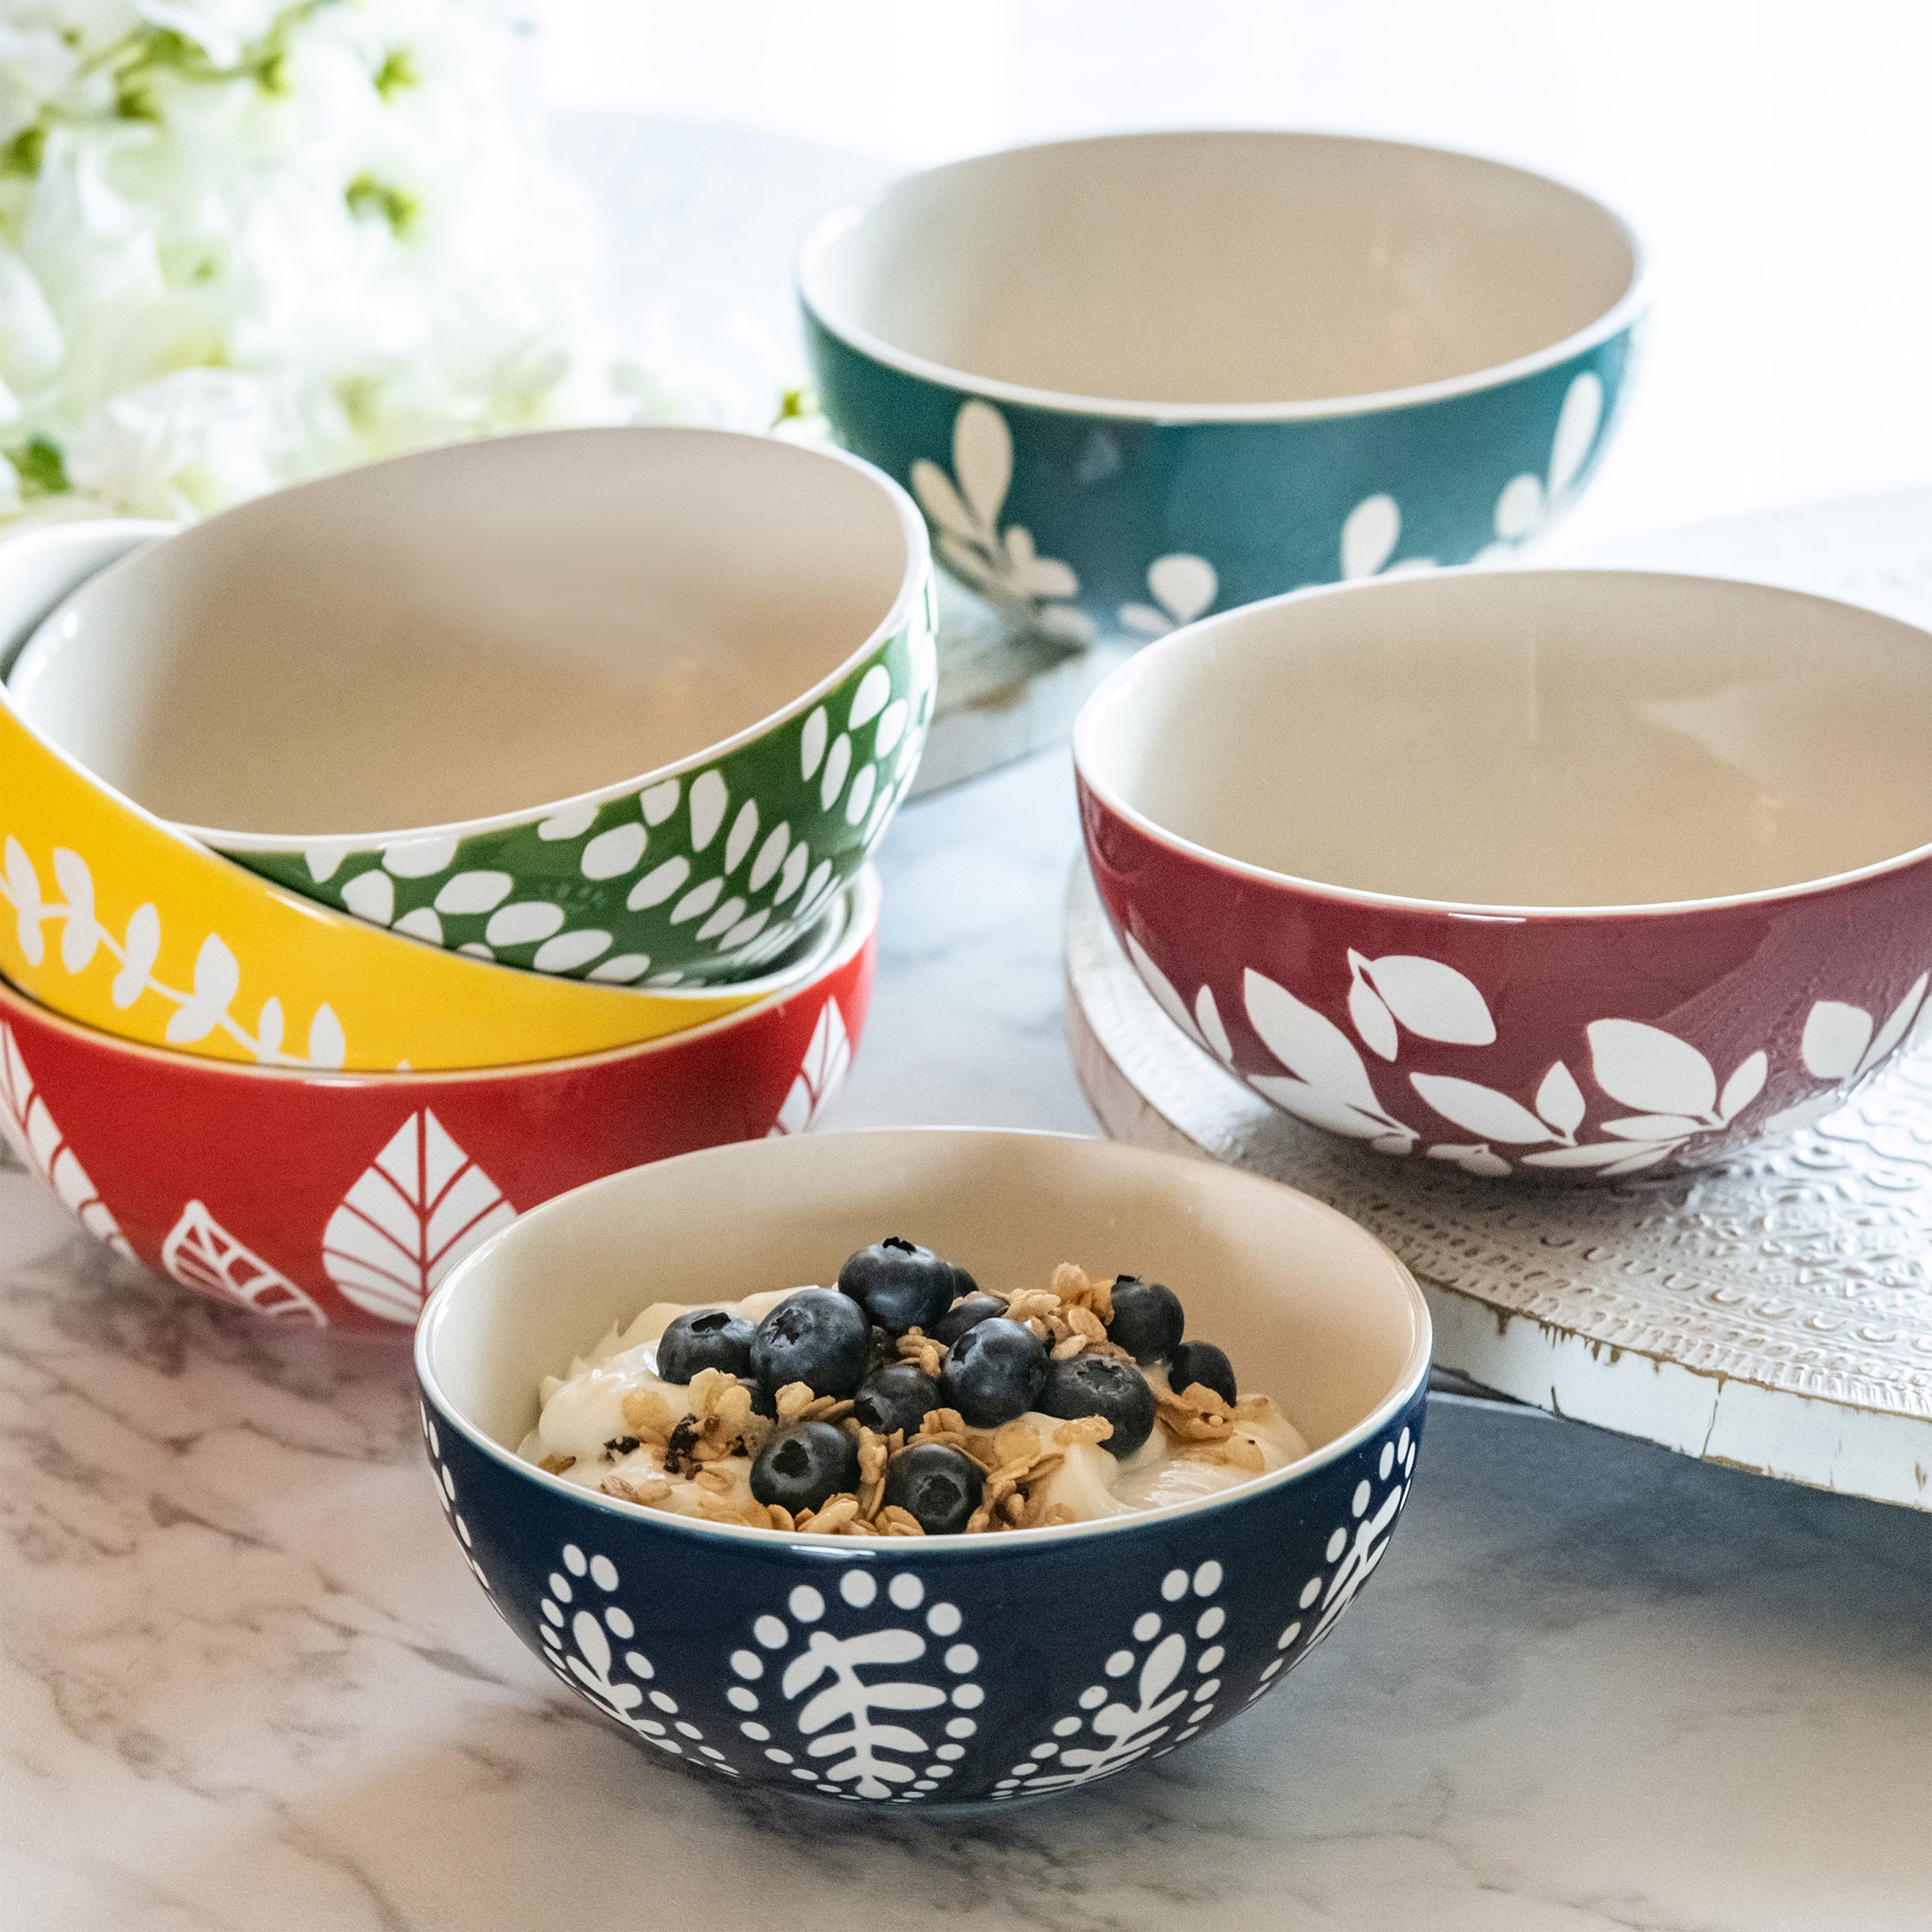 6-Piece Stoneware Bowl Set with Vented Lids Dishwasher & Microwave